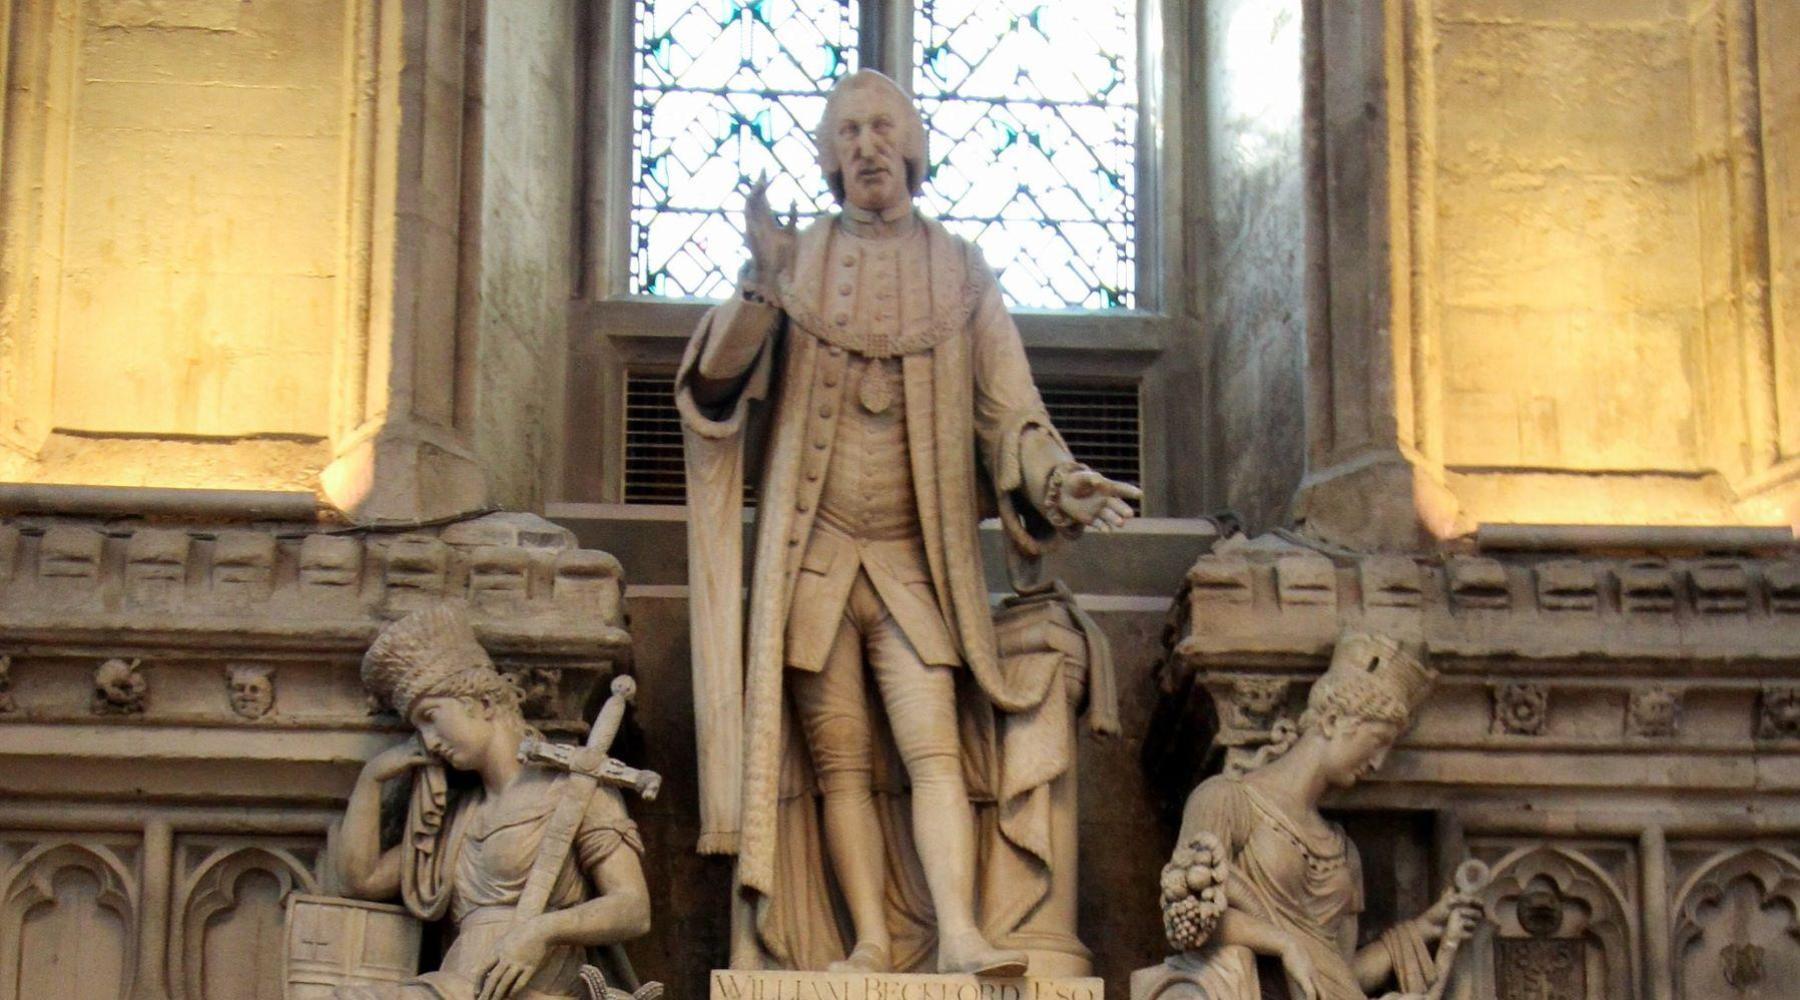 18th-century statue of Lord Mayor William Beckford in London